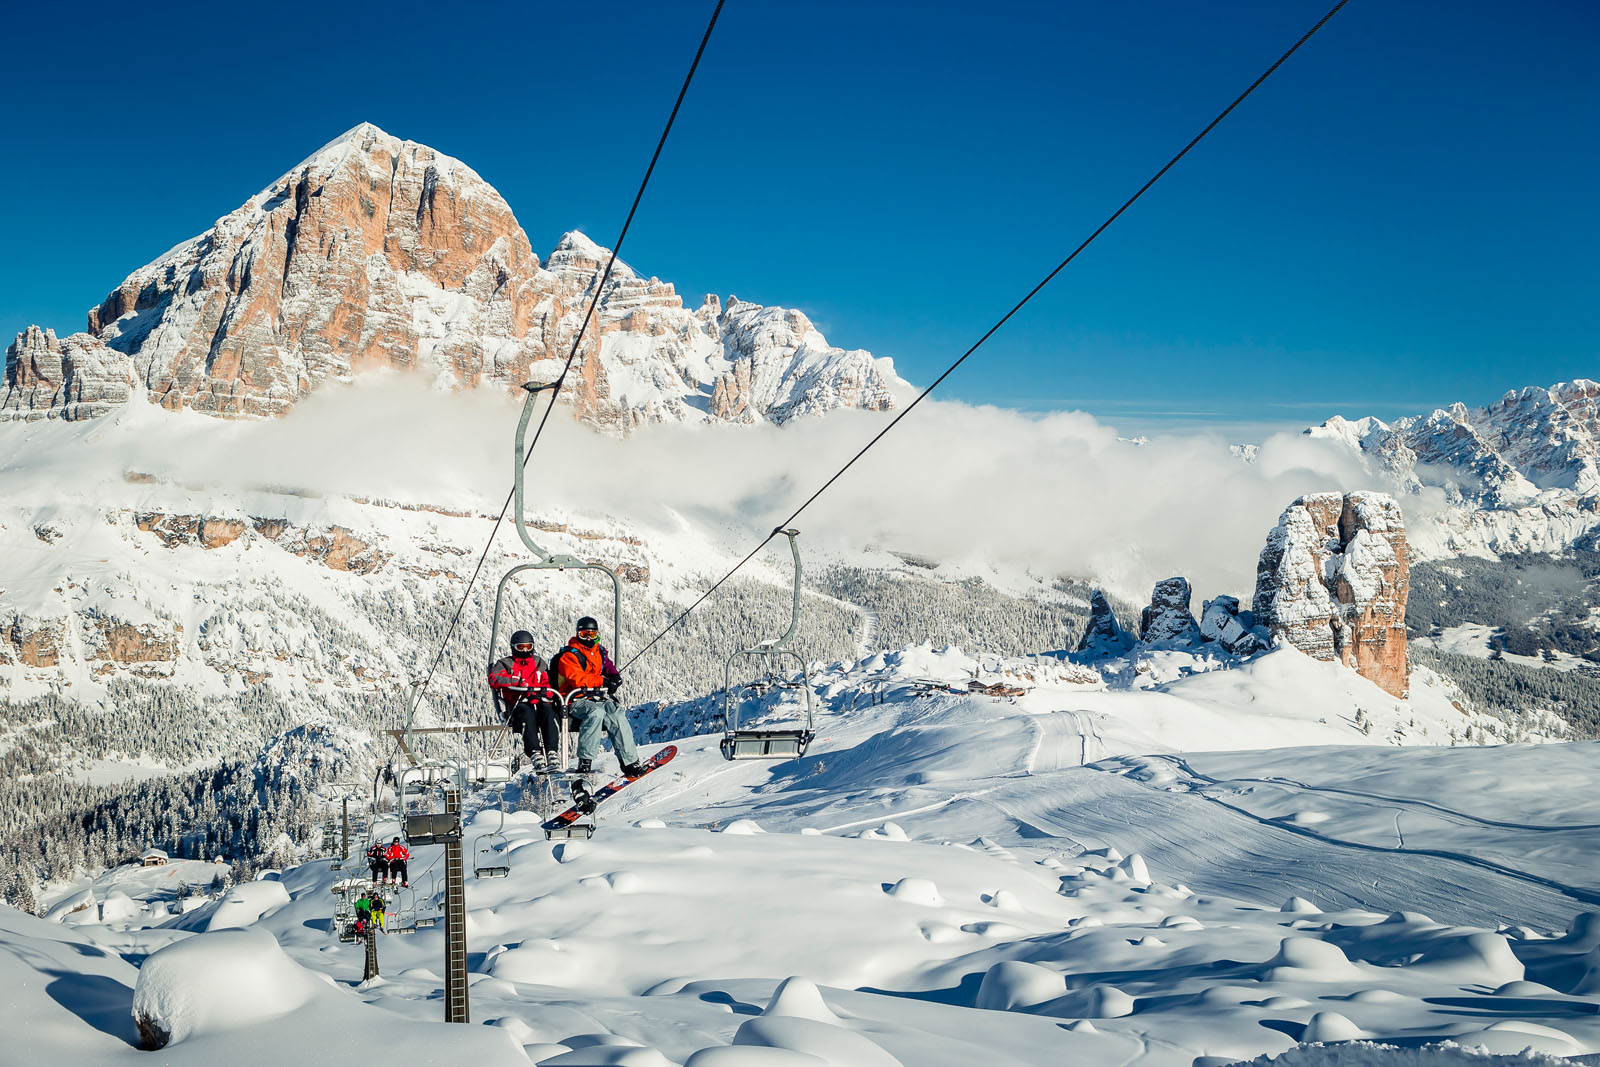 Cortina and its famous 5 Torrii. Photo: www.bandion.it. Milan-Cortina Awarded the Olympic Winter Games 2026.